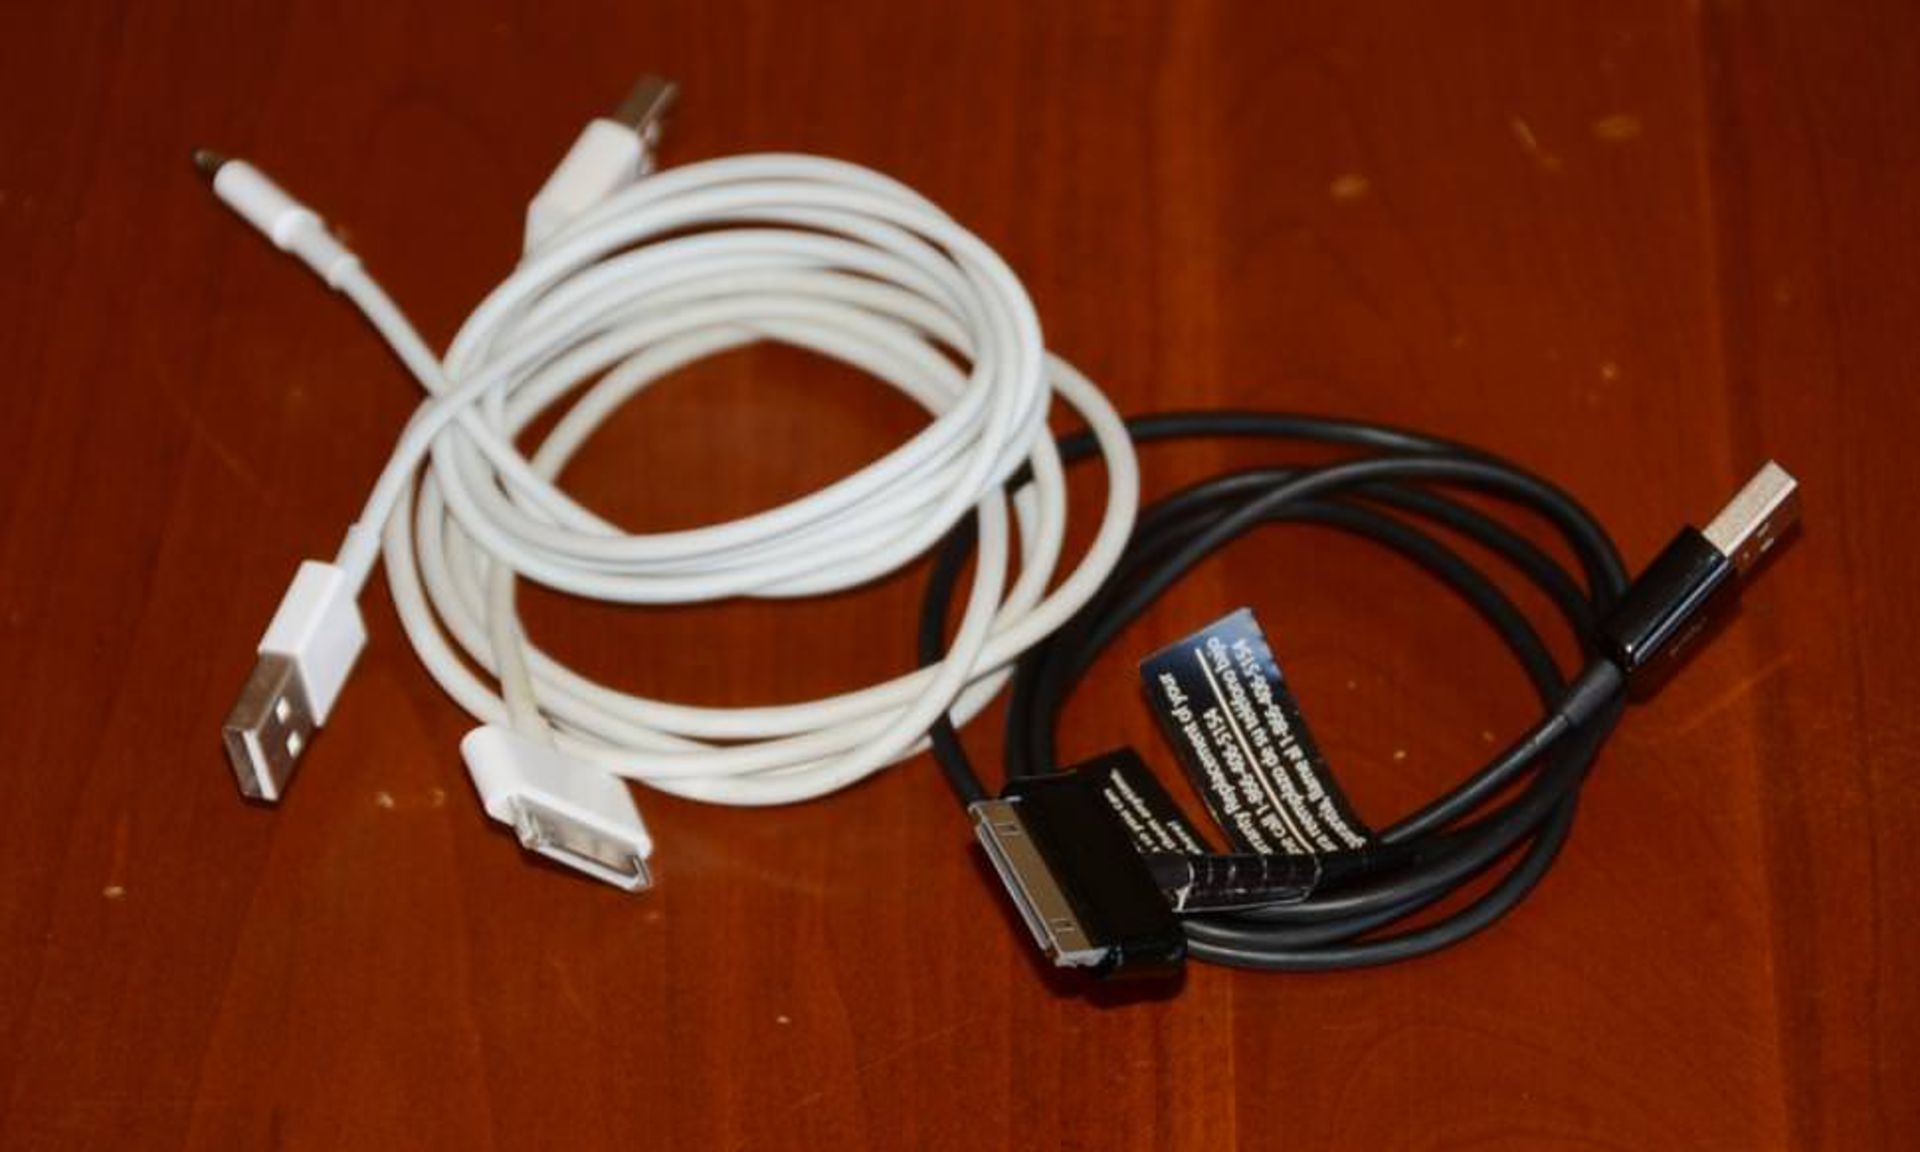 Proprietary USB Cables